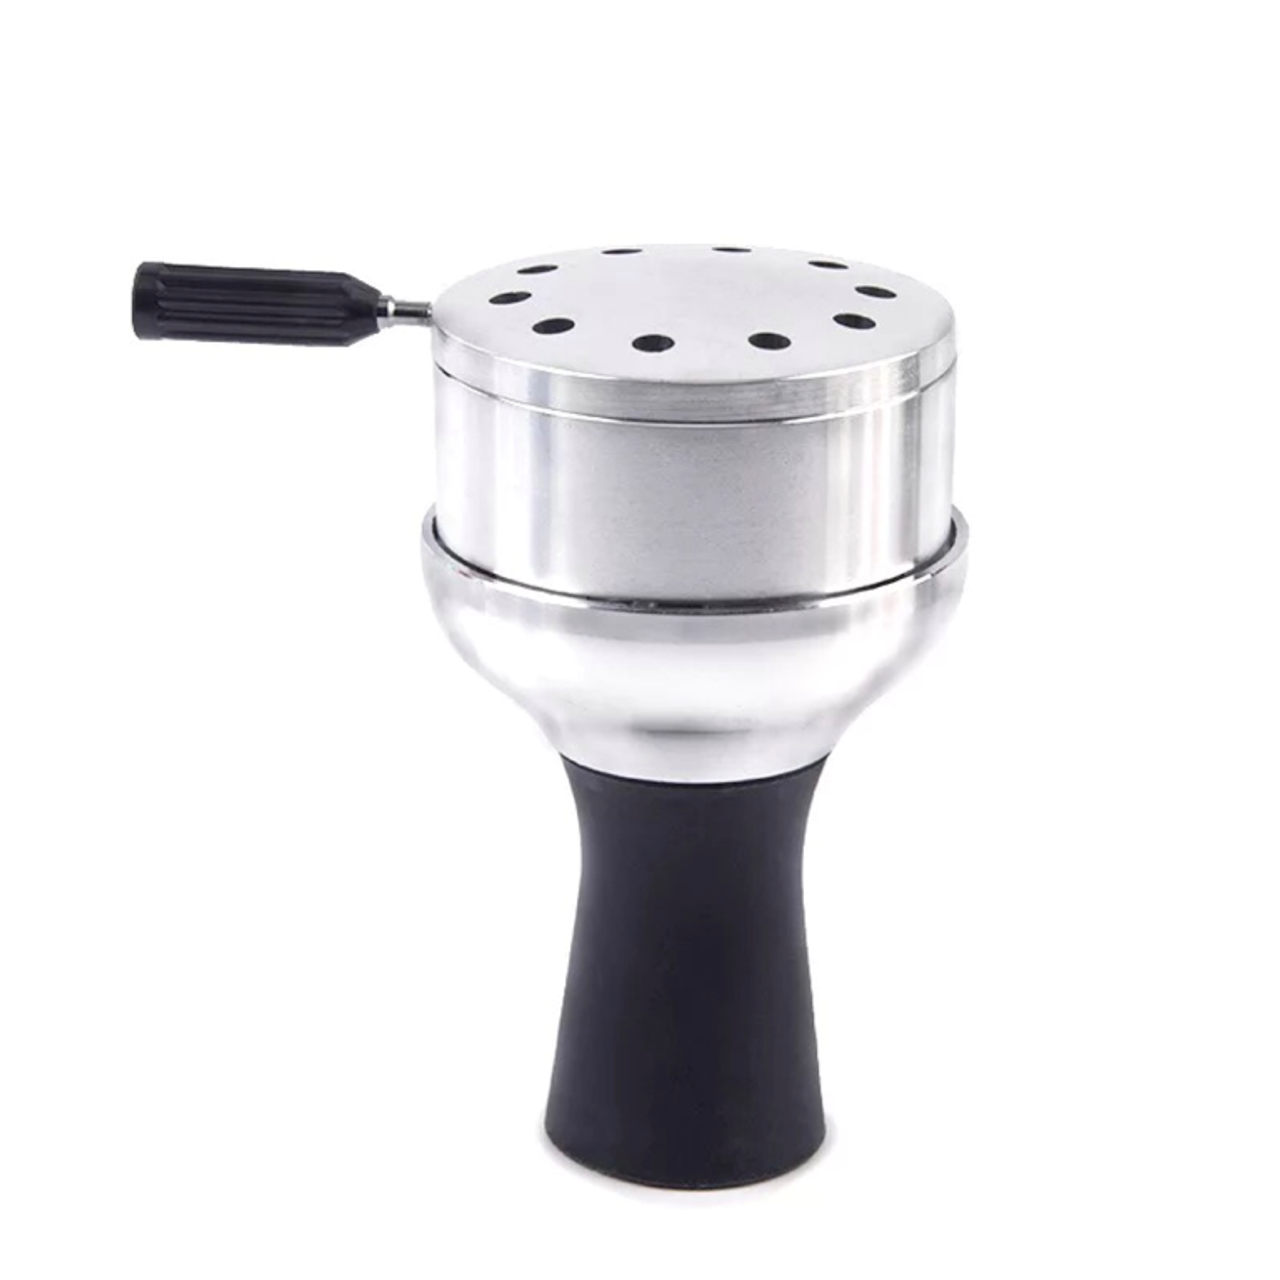 Silicon Hookah Bowl w/h Stainless steel core